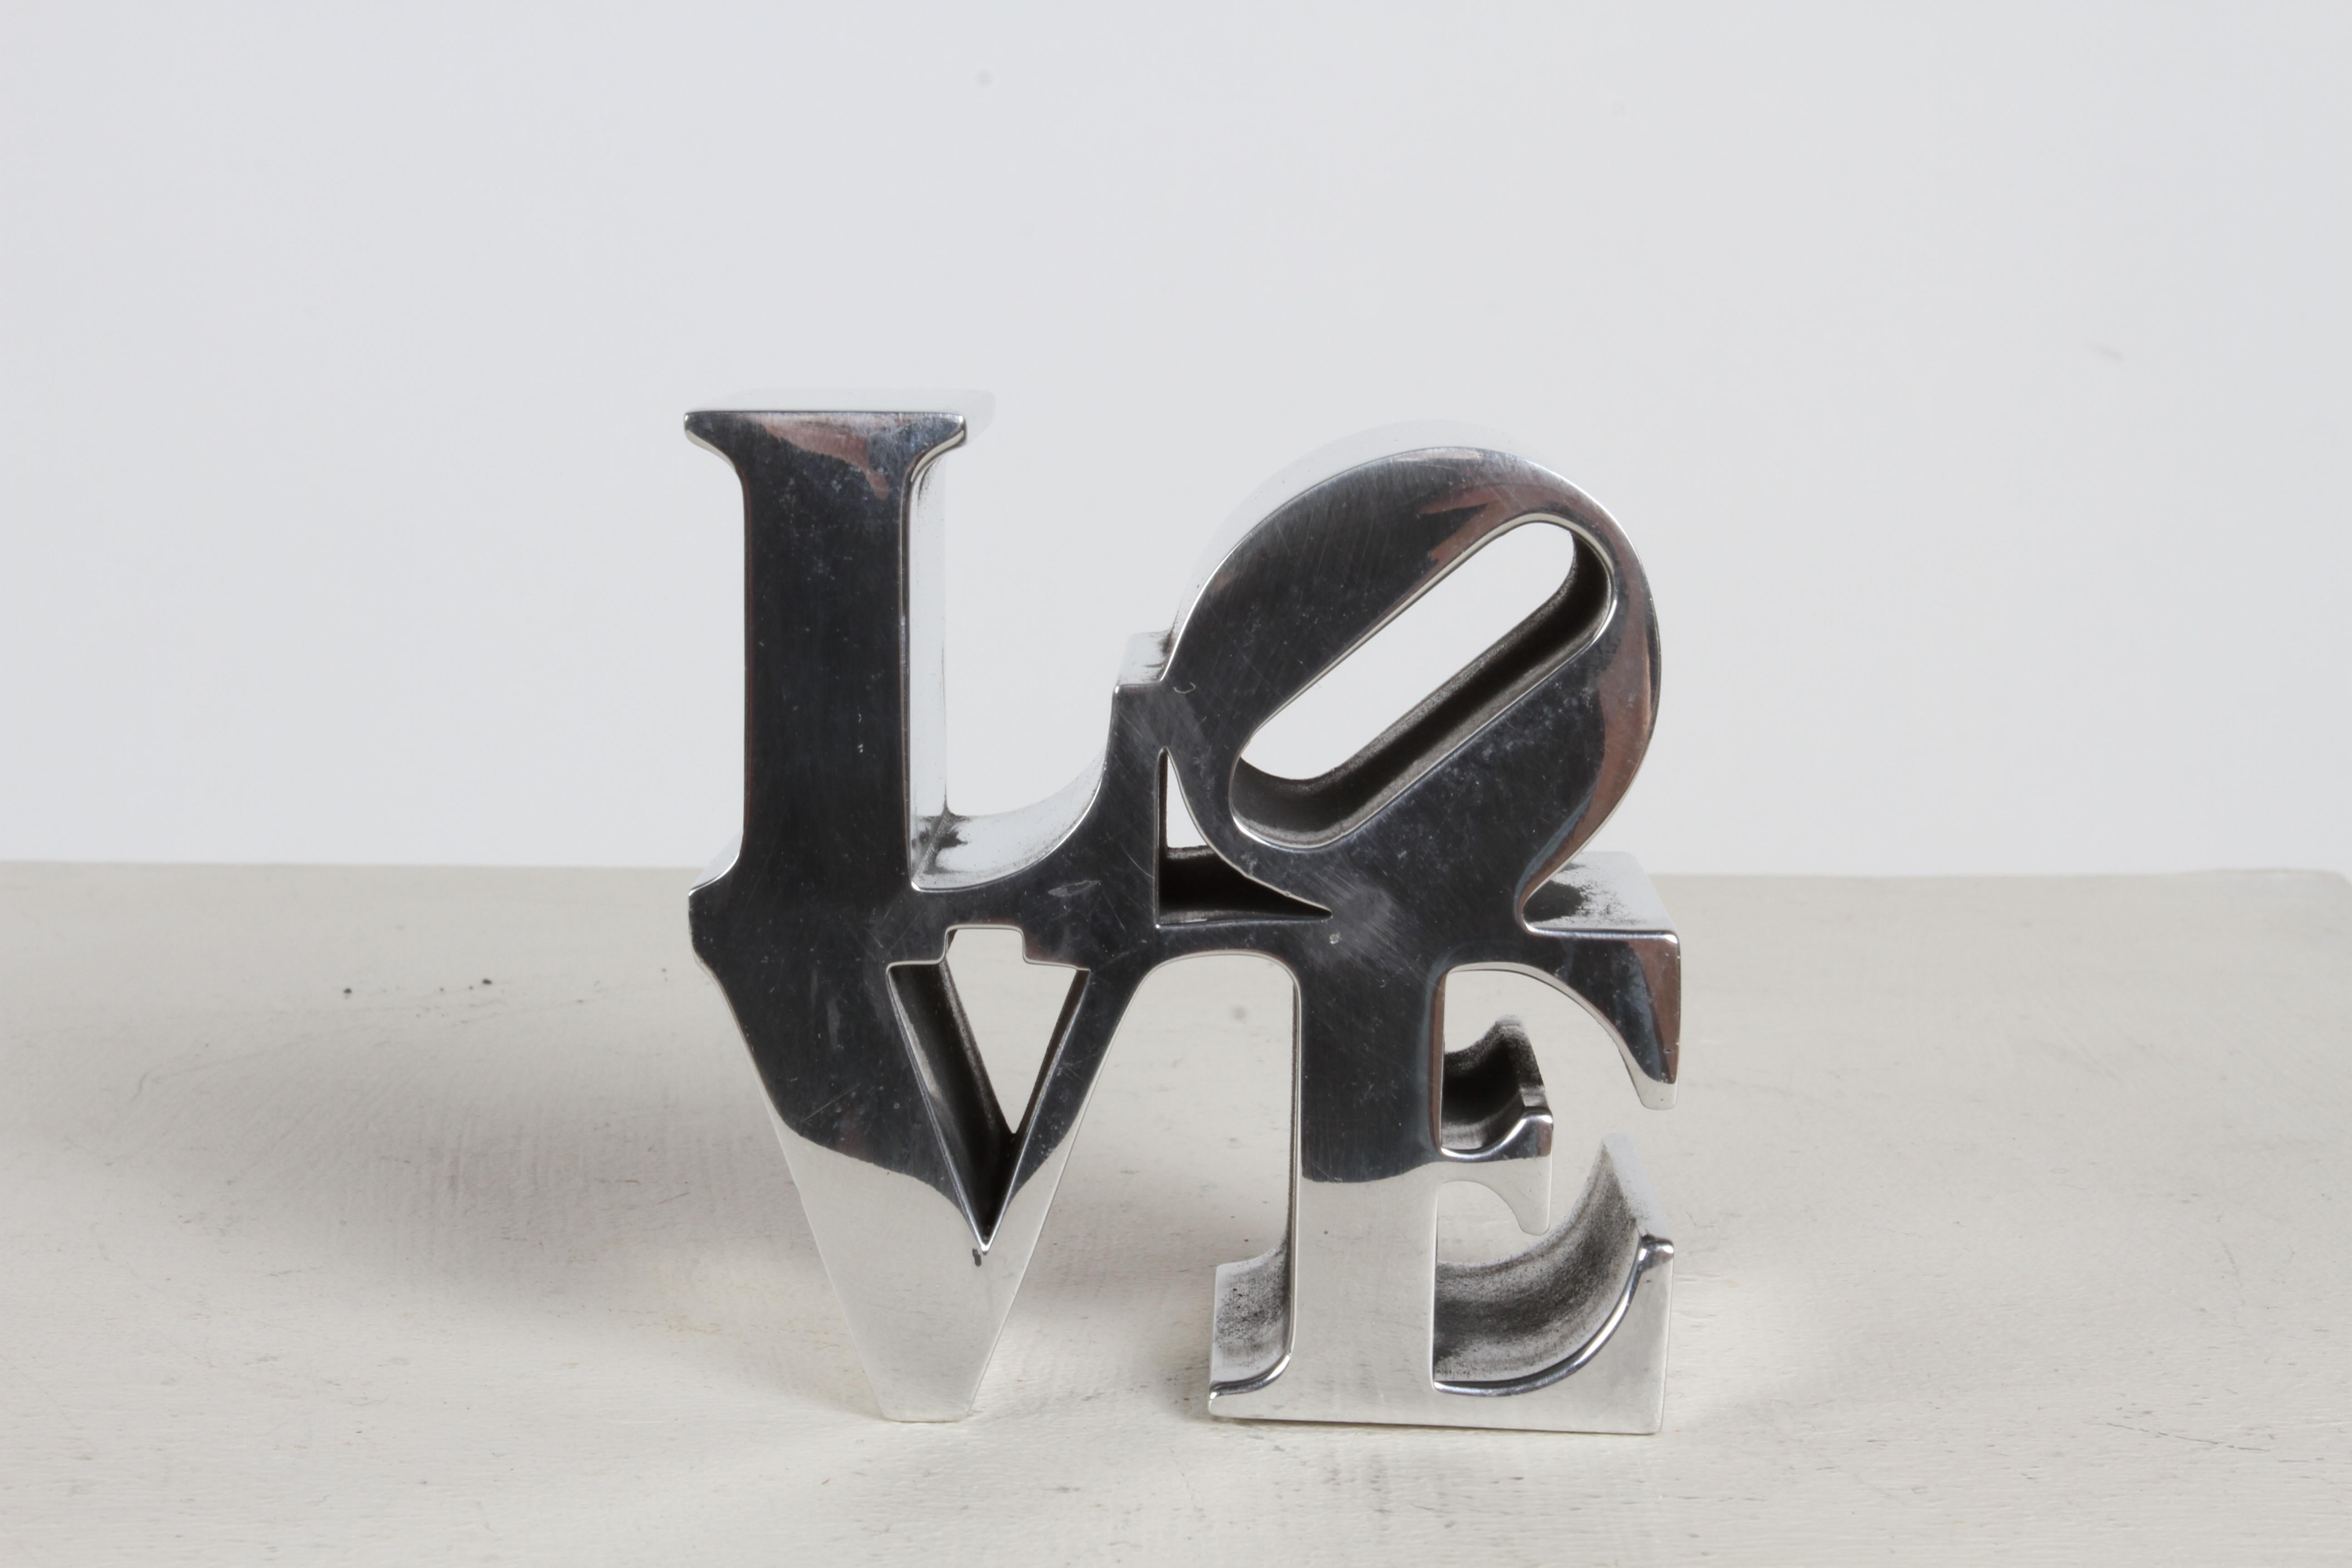 Authentic vintage 1970s after Robert Indiana LOVE sculpture, makes a great desk accessory. These were at one time sold in museum stores , such as MOMA. Robert Indiana's original love painting from the 1960s put him on the map as a major artist. Has